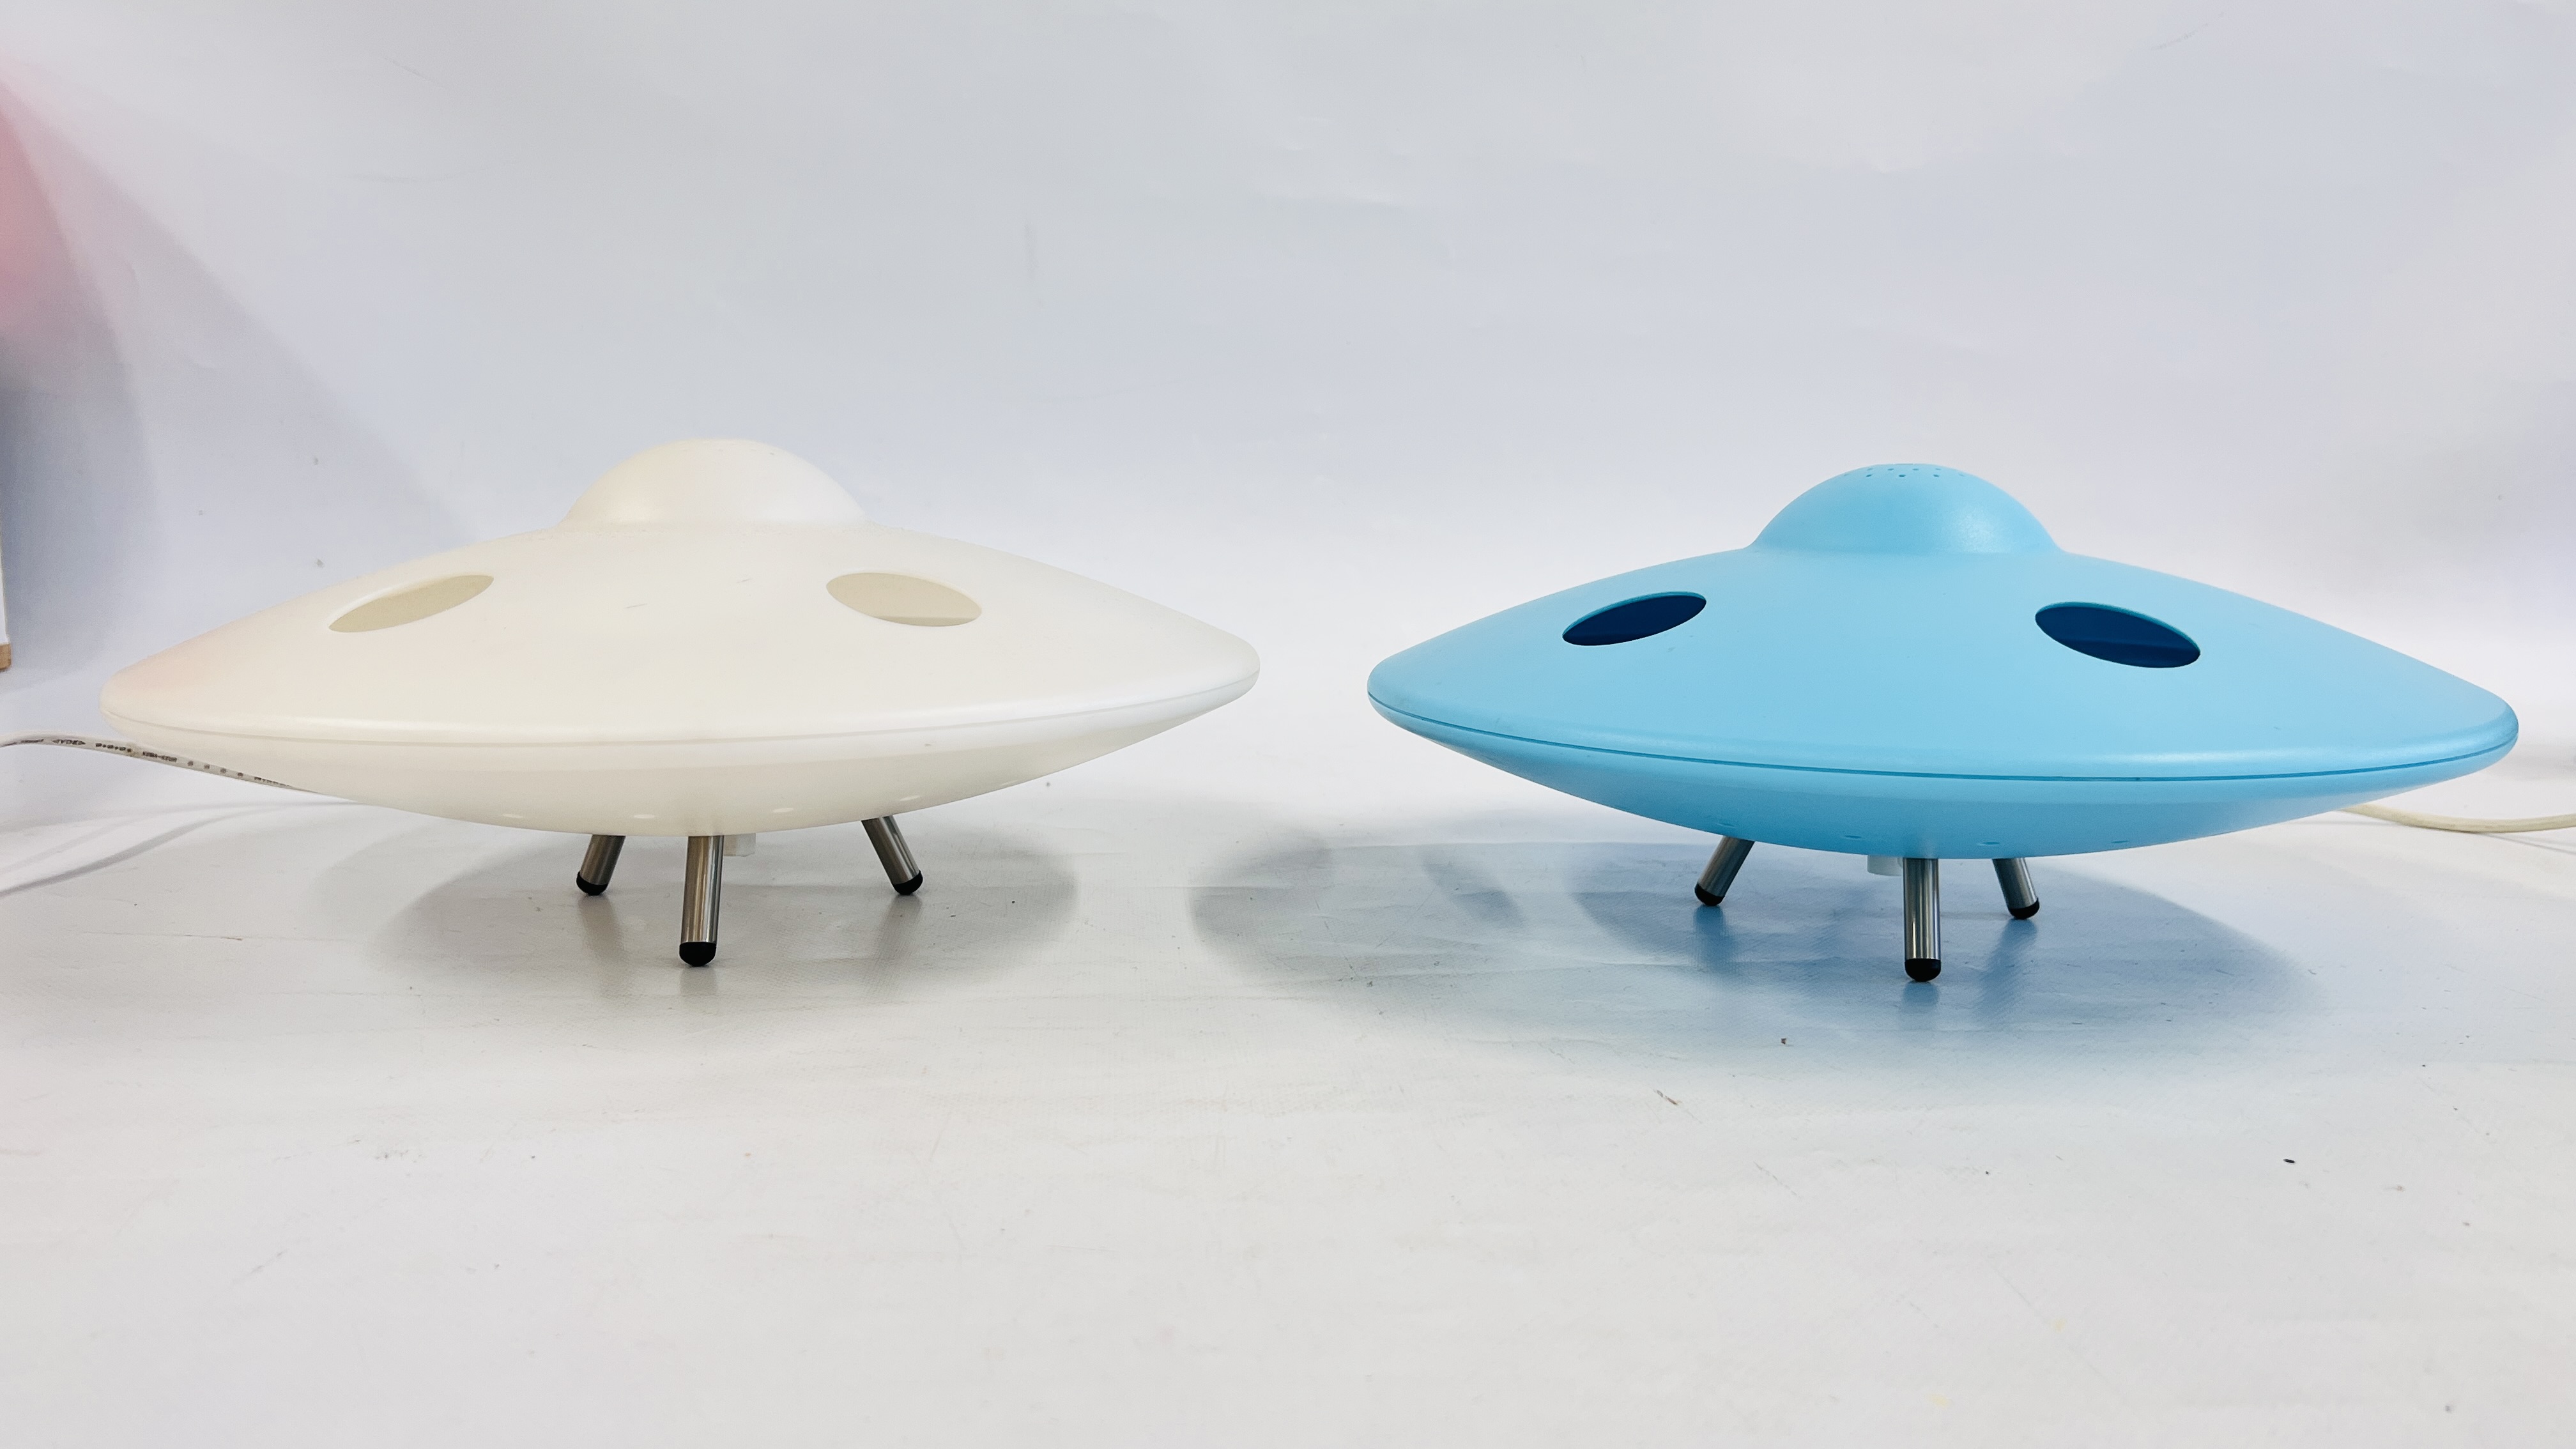 A PAIR OF DESIGNER FLYING SAUCER TABLE LAMPS, DESIGNED BY MR.